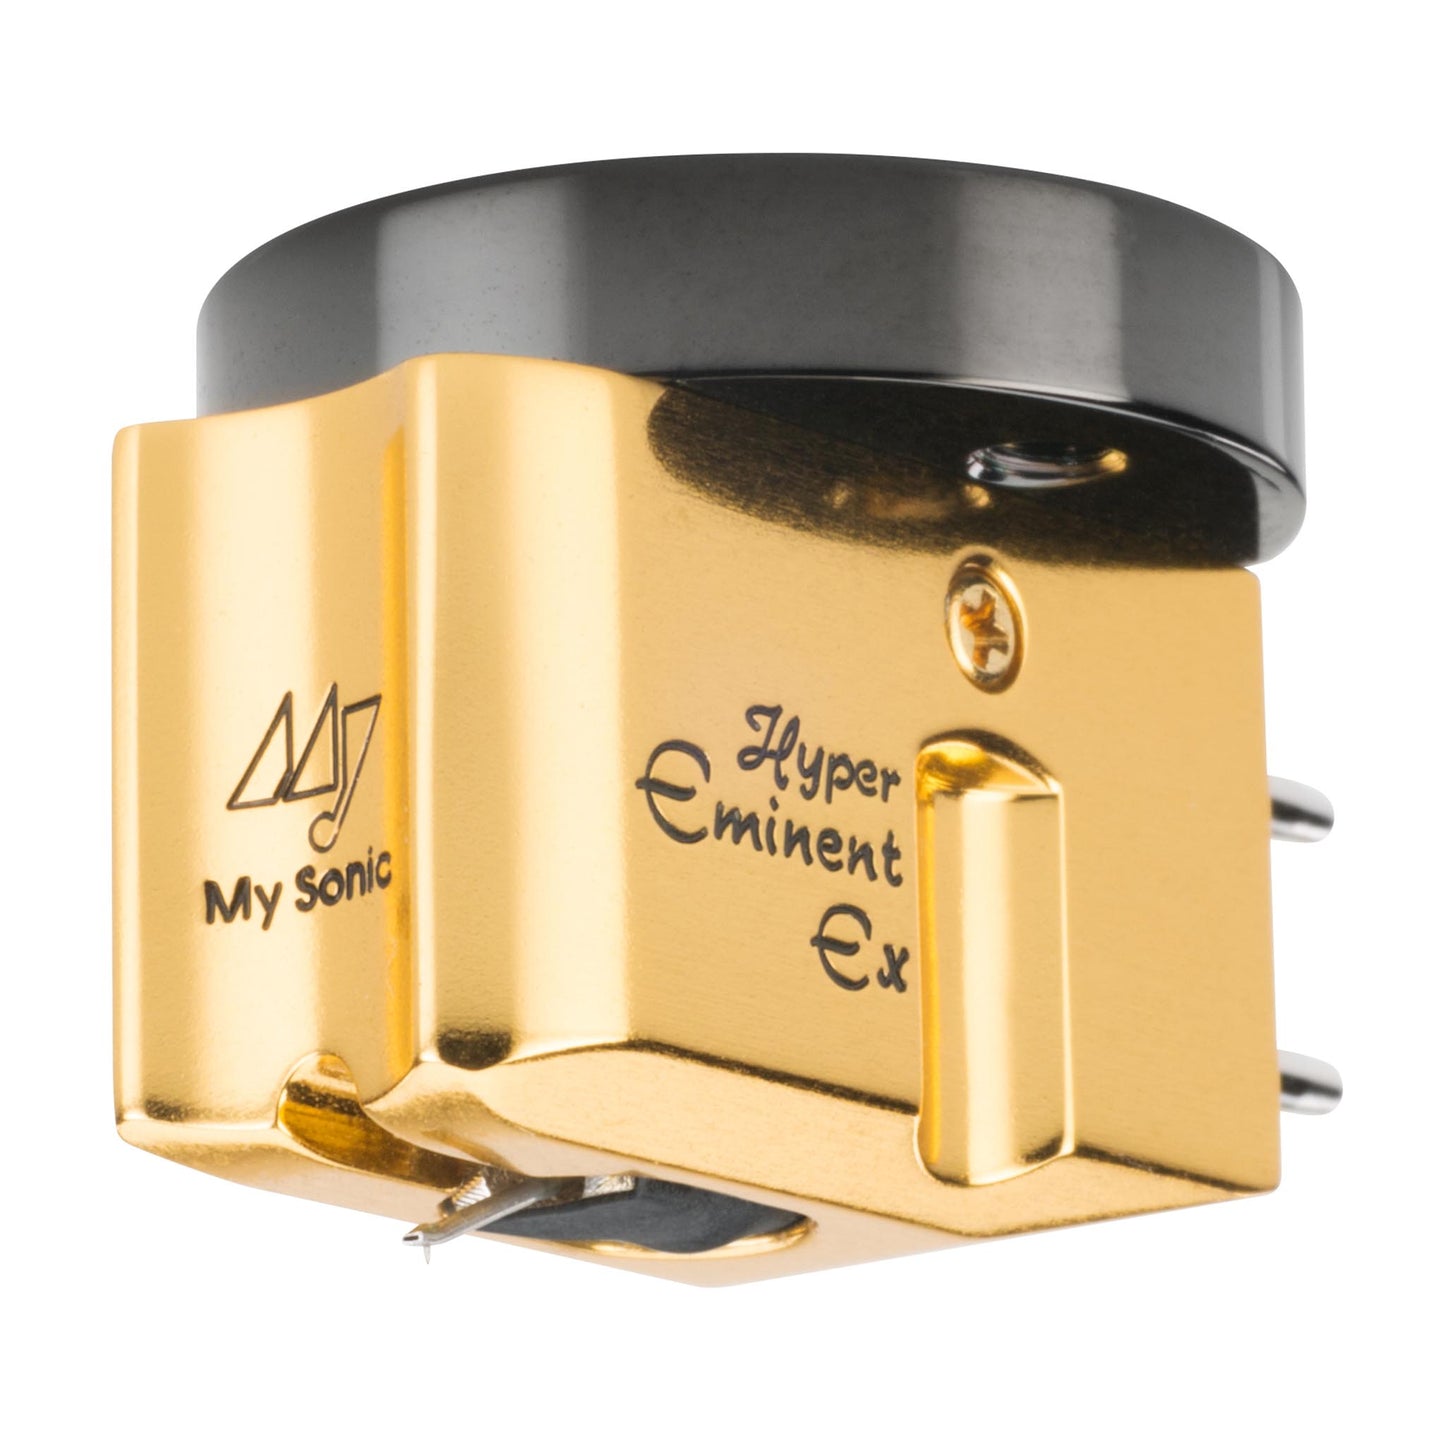 My Sonic Lab Hyper Eminent EX Moving Coil Cartridge